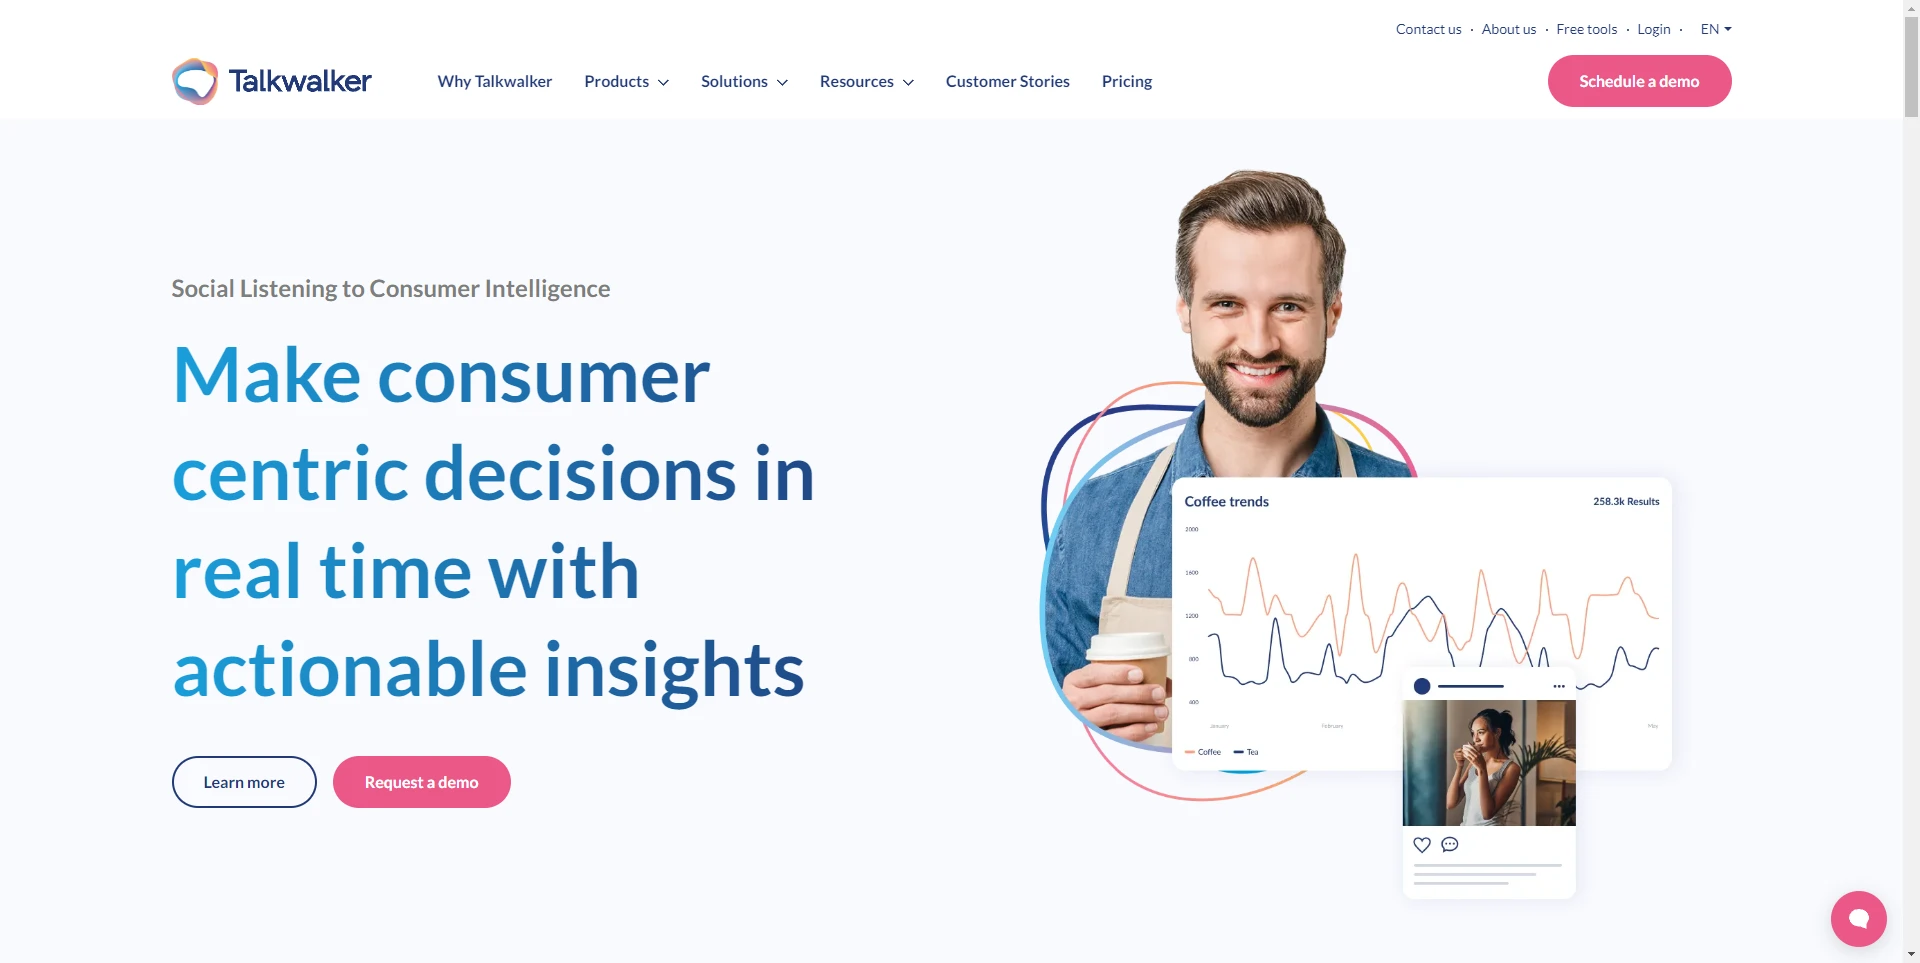 Talkwalker landing page showing how you can make decisions with consumer insights